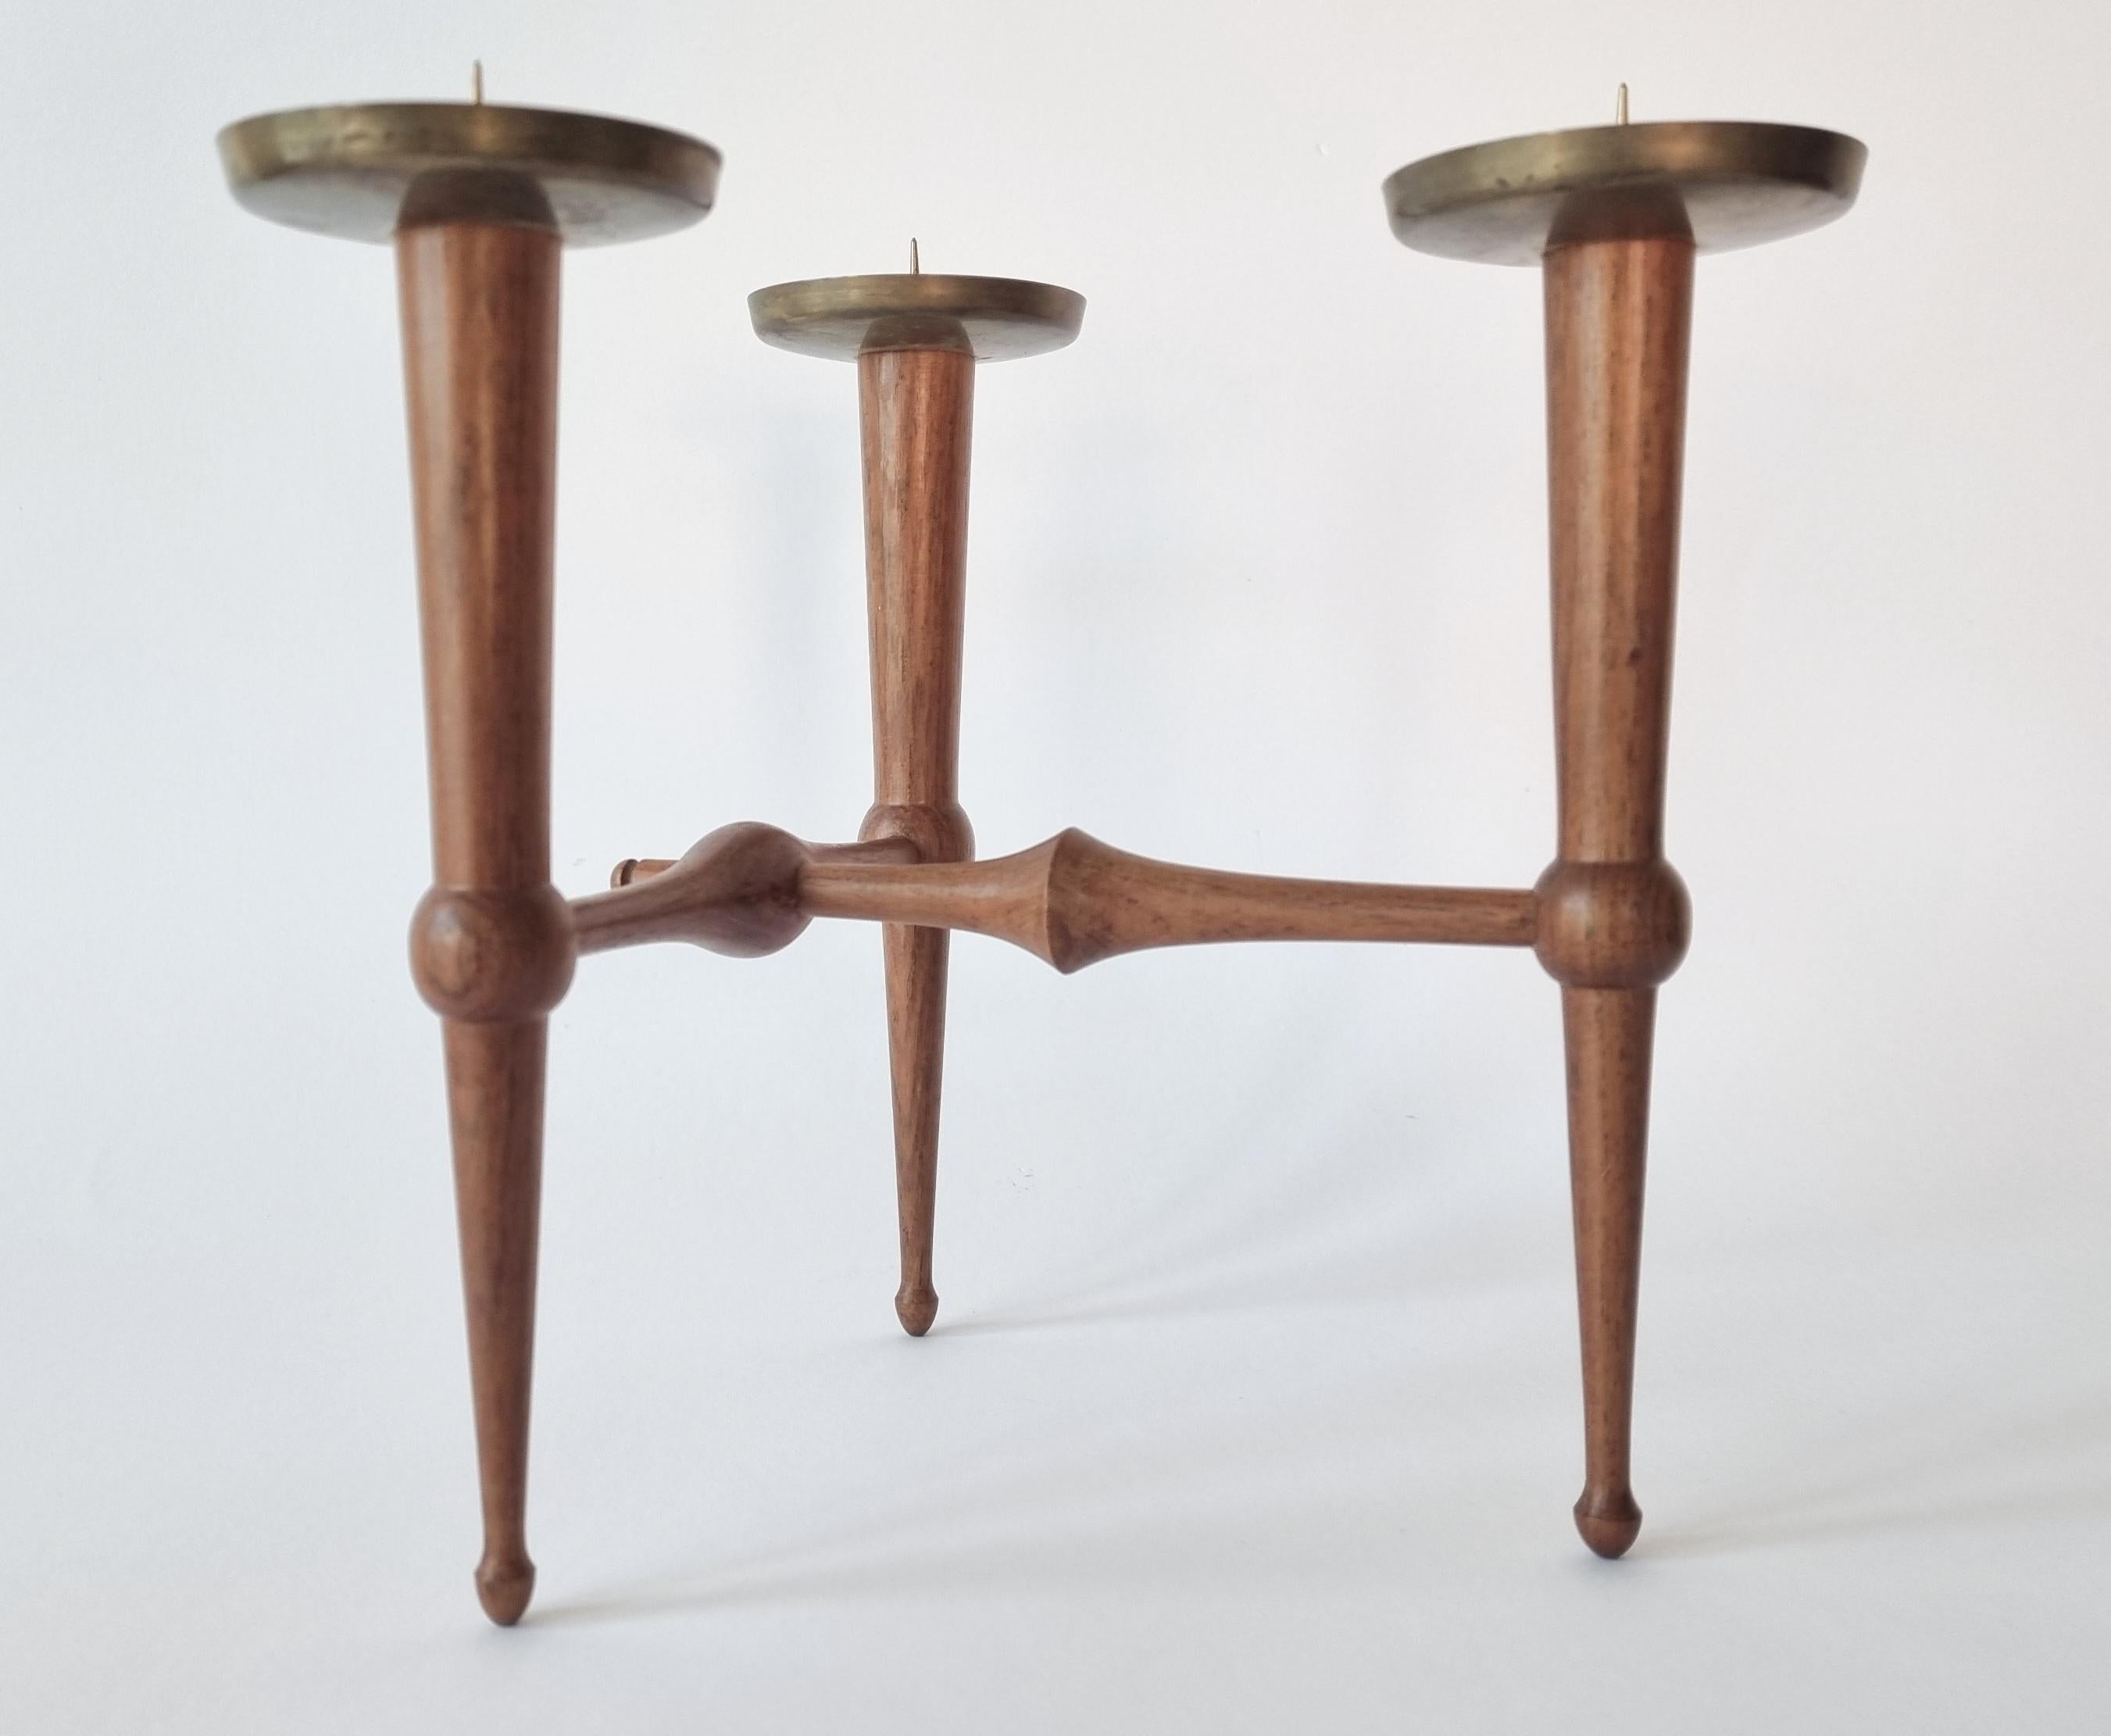 Midcentury Teak and Brass Rare Table Candle Holder / Stick, Denmark, 1960s For Sale 10